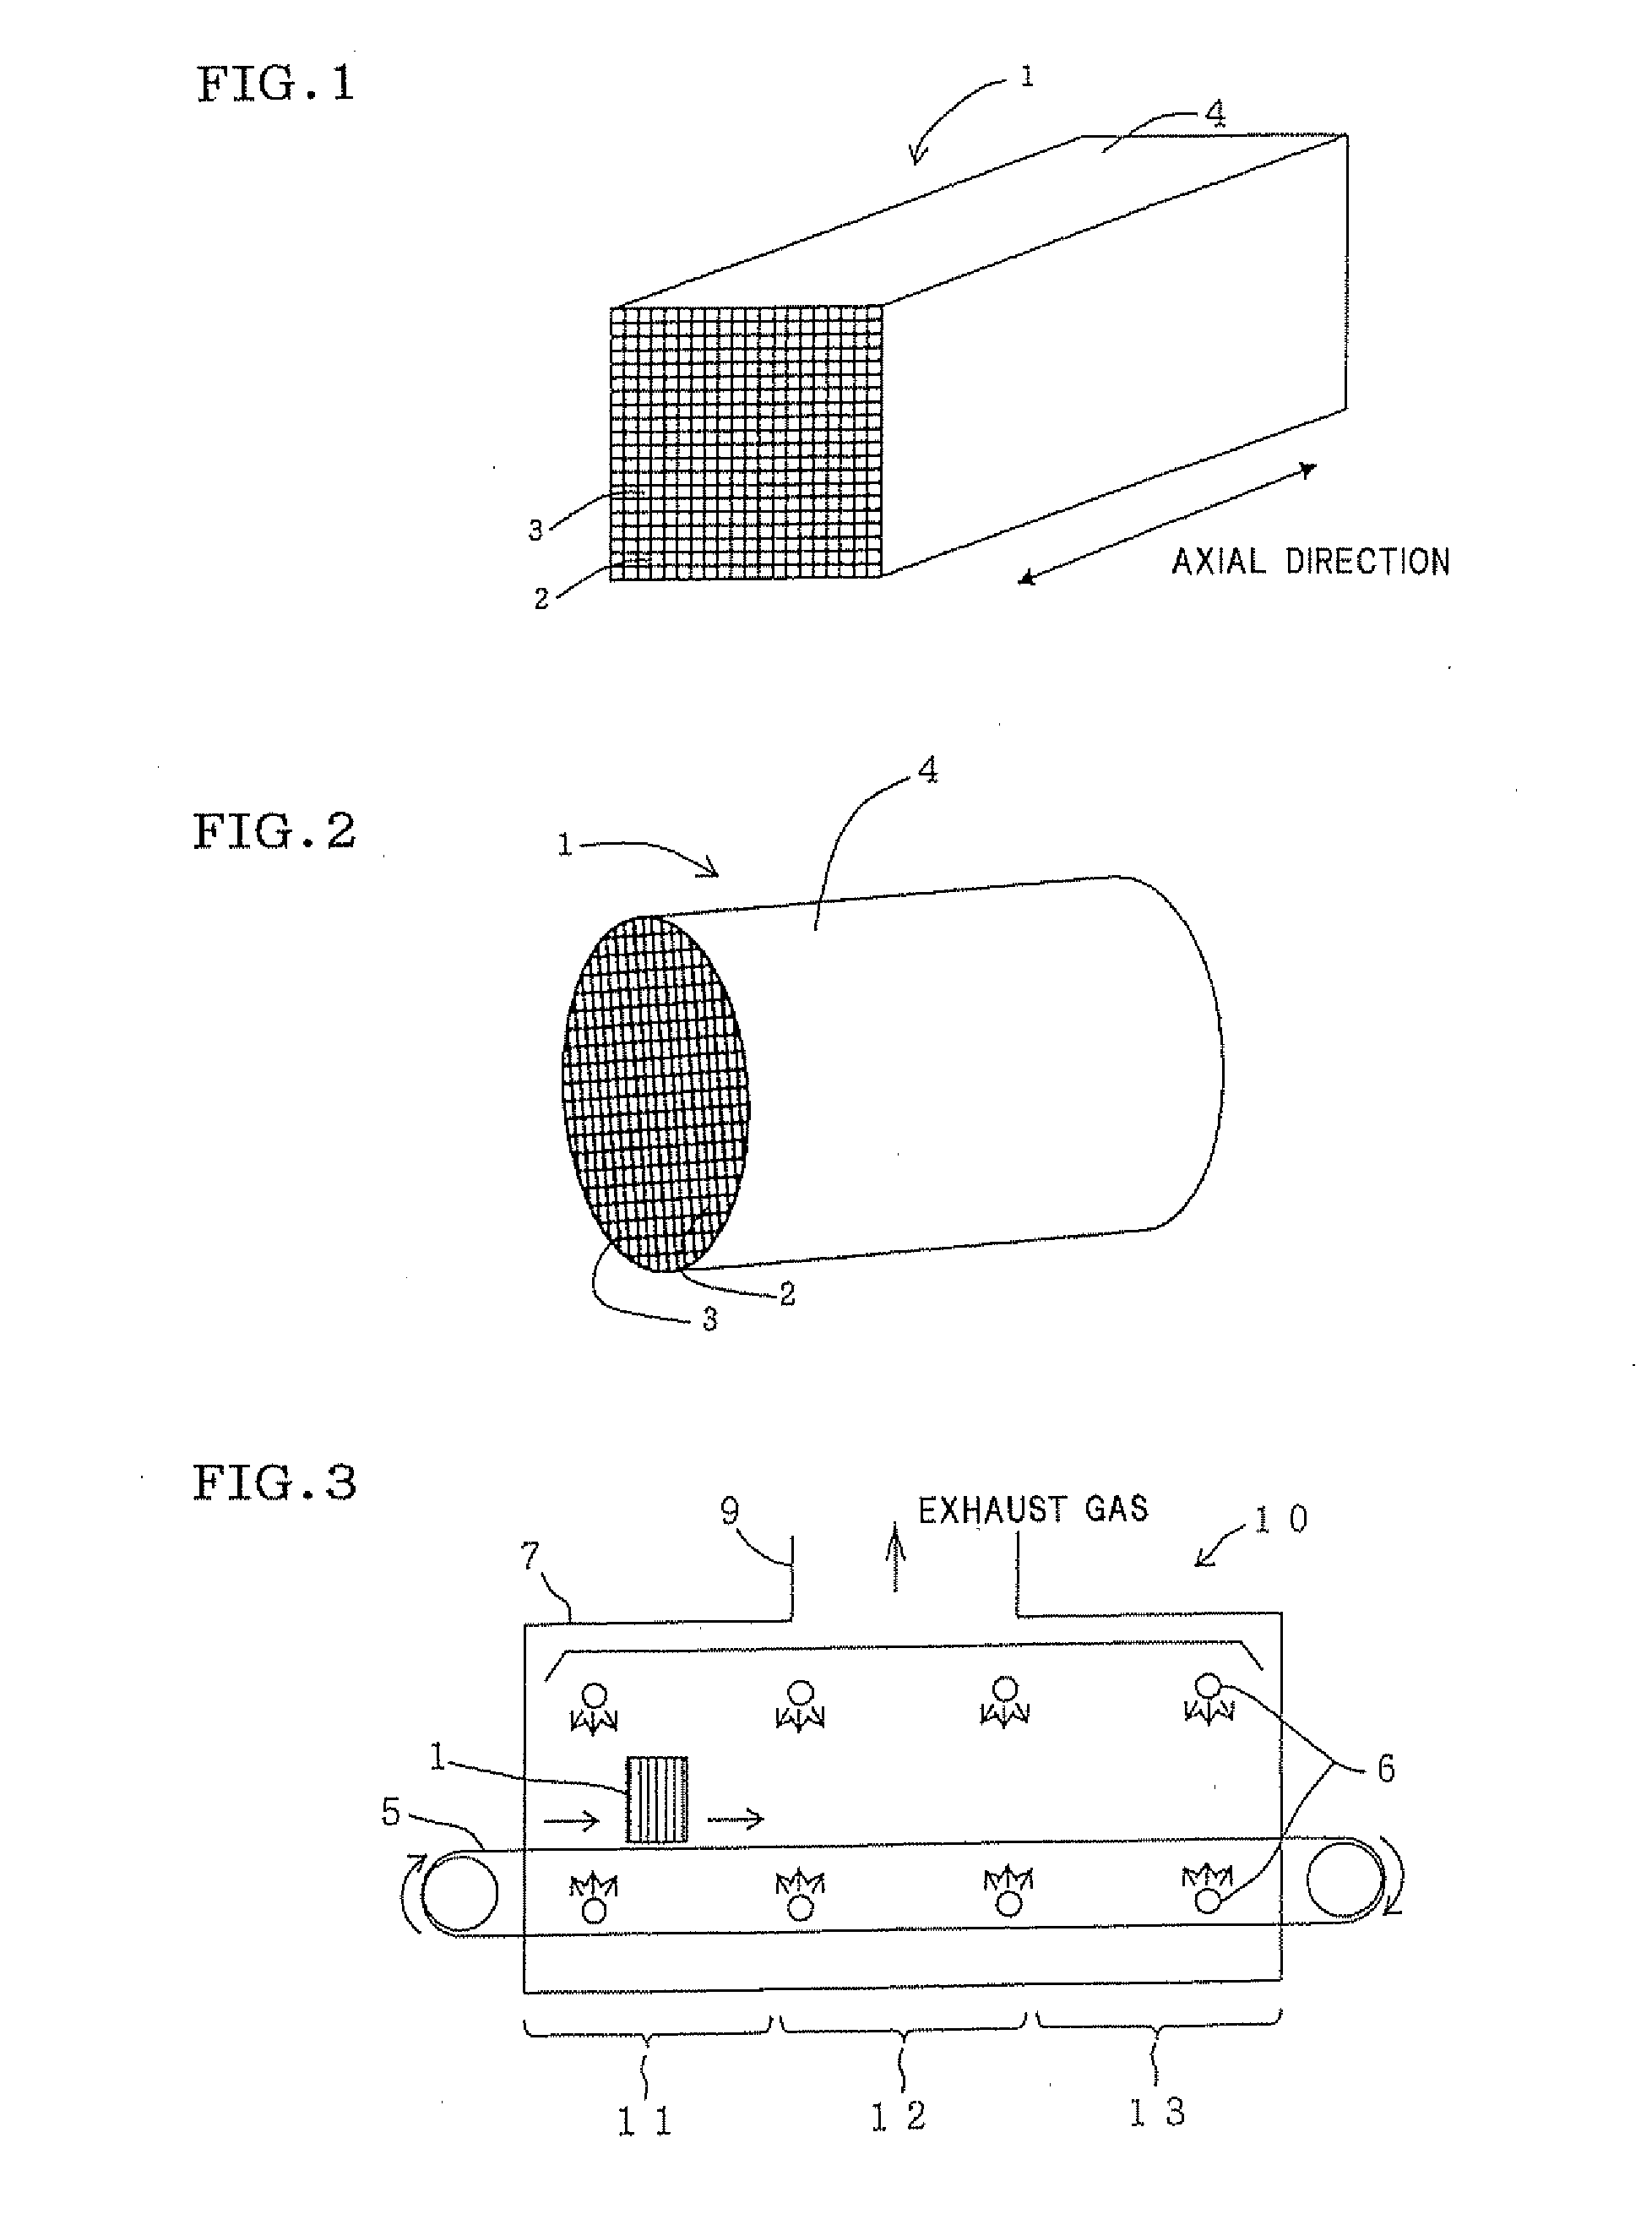 Method for pretreating honeycomb formed article before firing and system for pretreating honeycomb formed article before firing